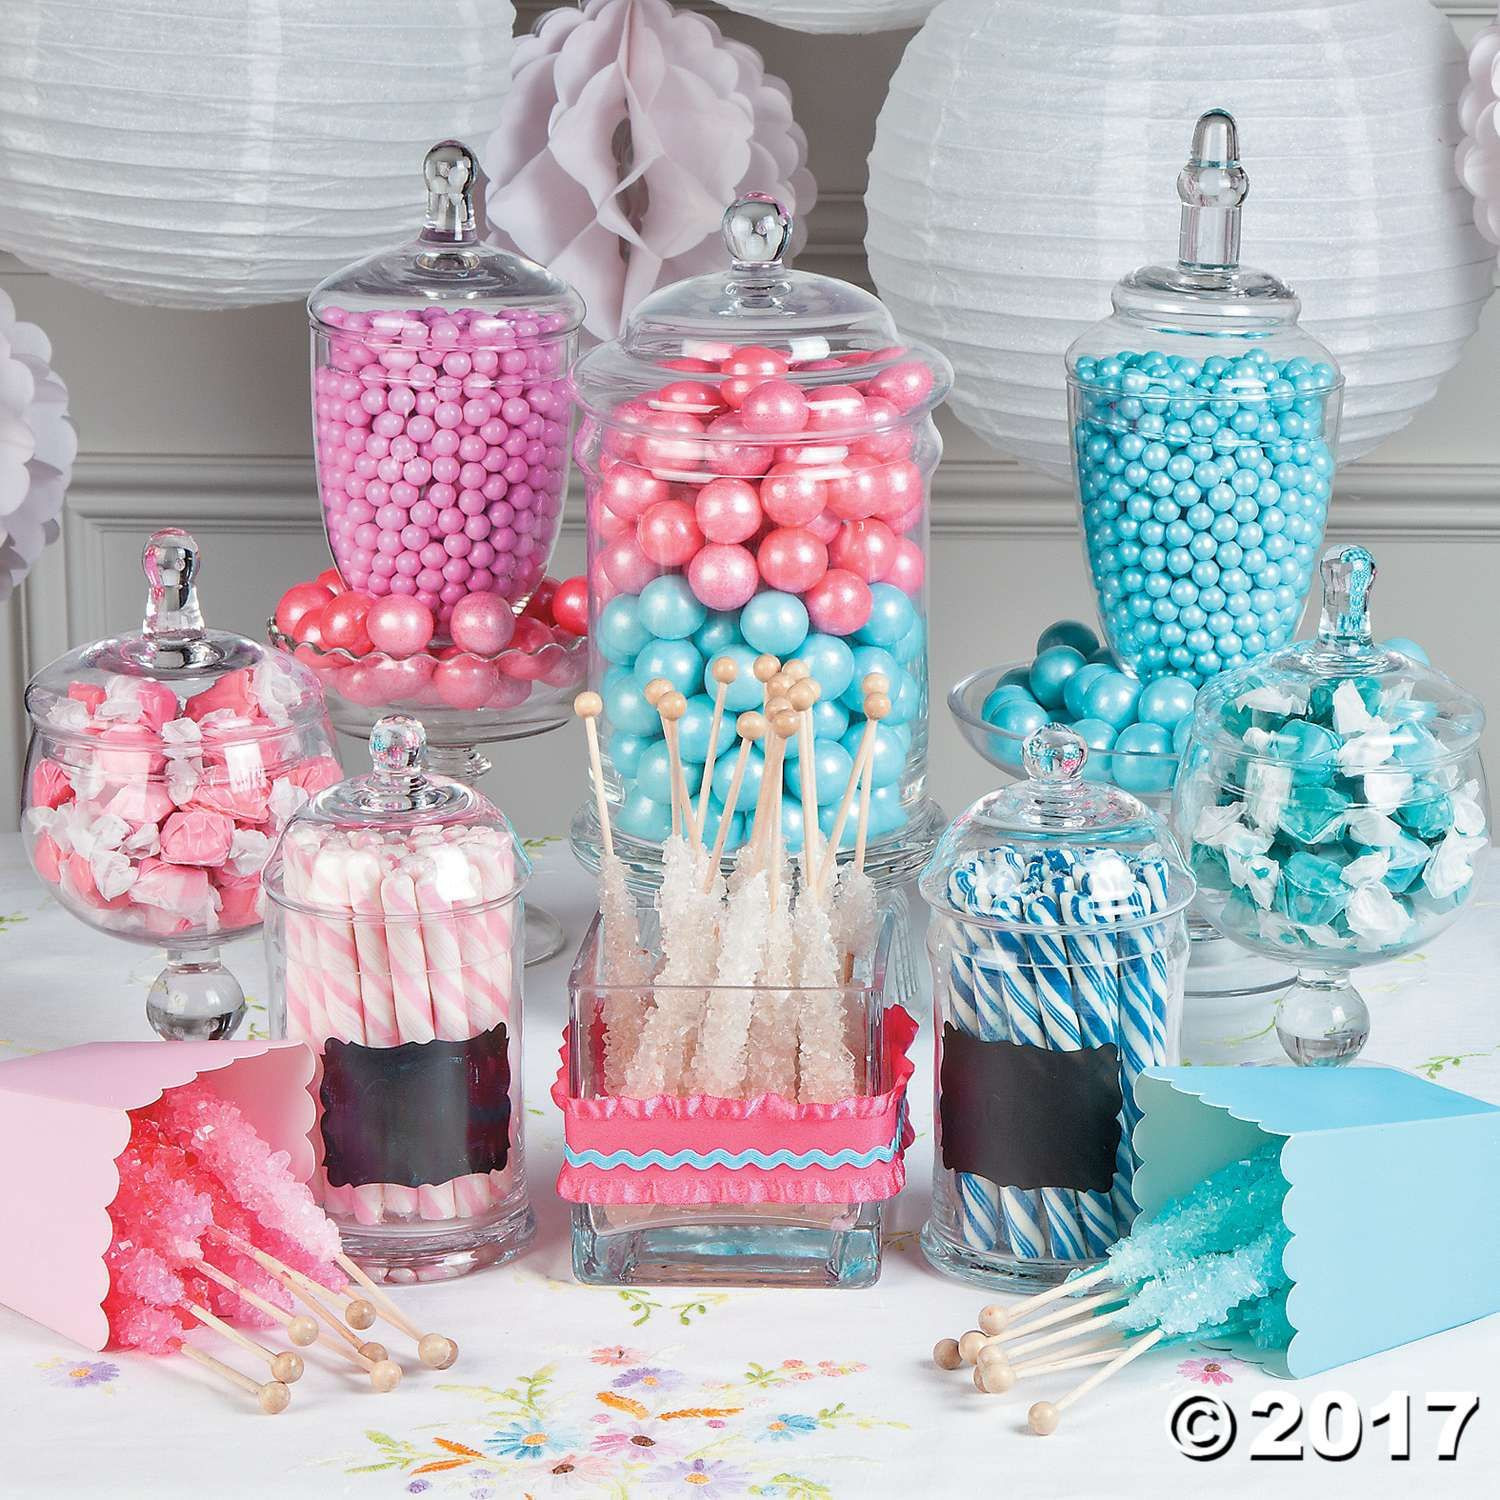 Great Gender Reveal Party Ideas
 Gender Reveal Candy Buffet Idea